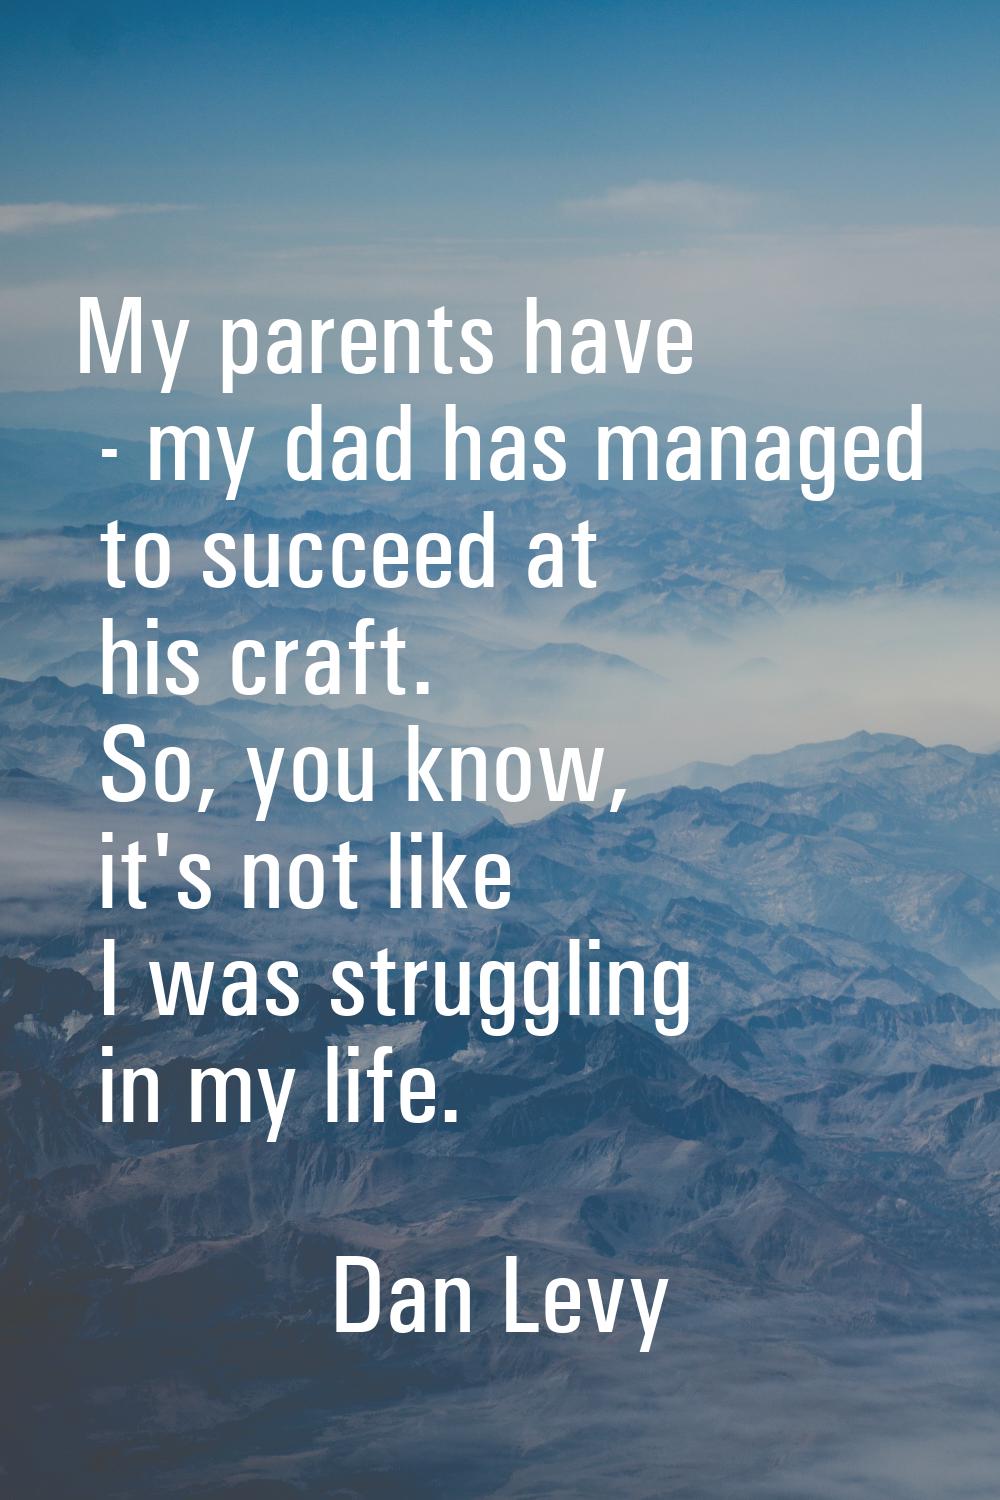 My parents have - my dad has managed to succeed at his craft. So, you know, it's not like I was str